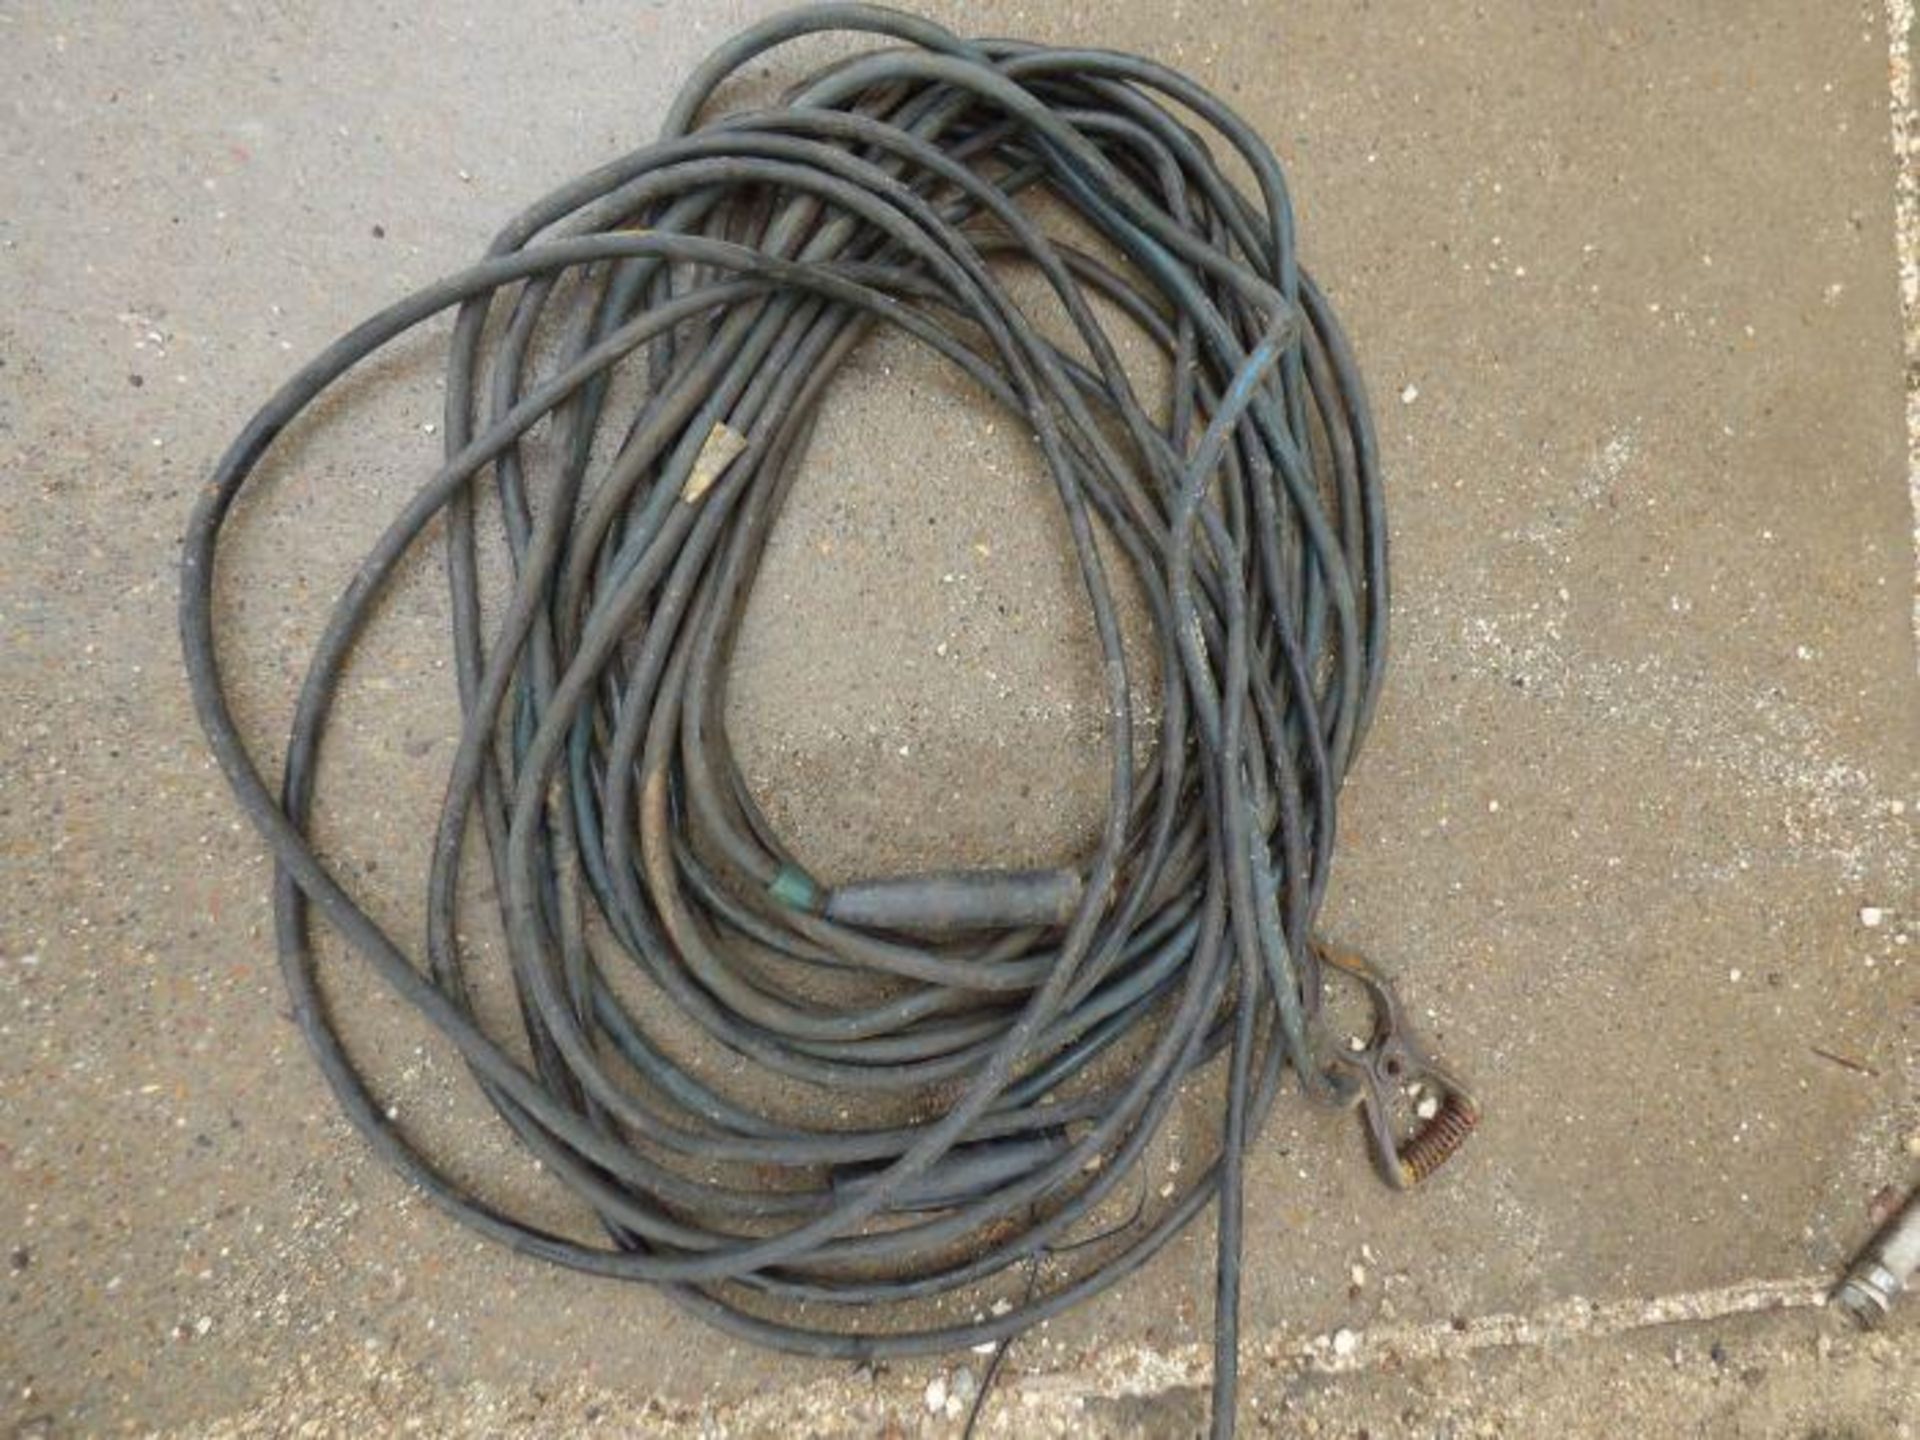 Hoses, Cords, Tow Strap - Image 2 of 5